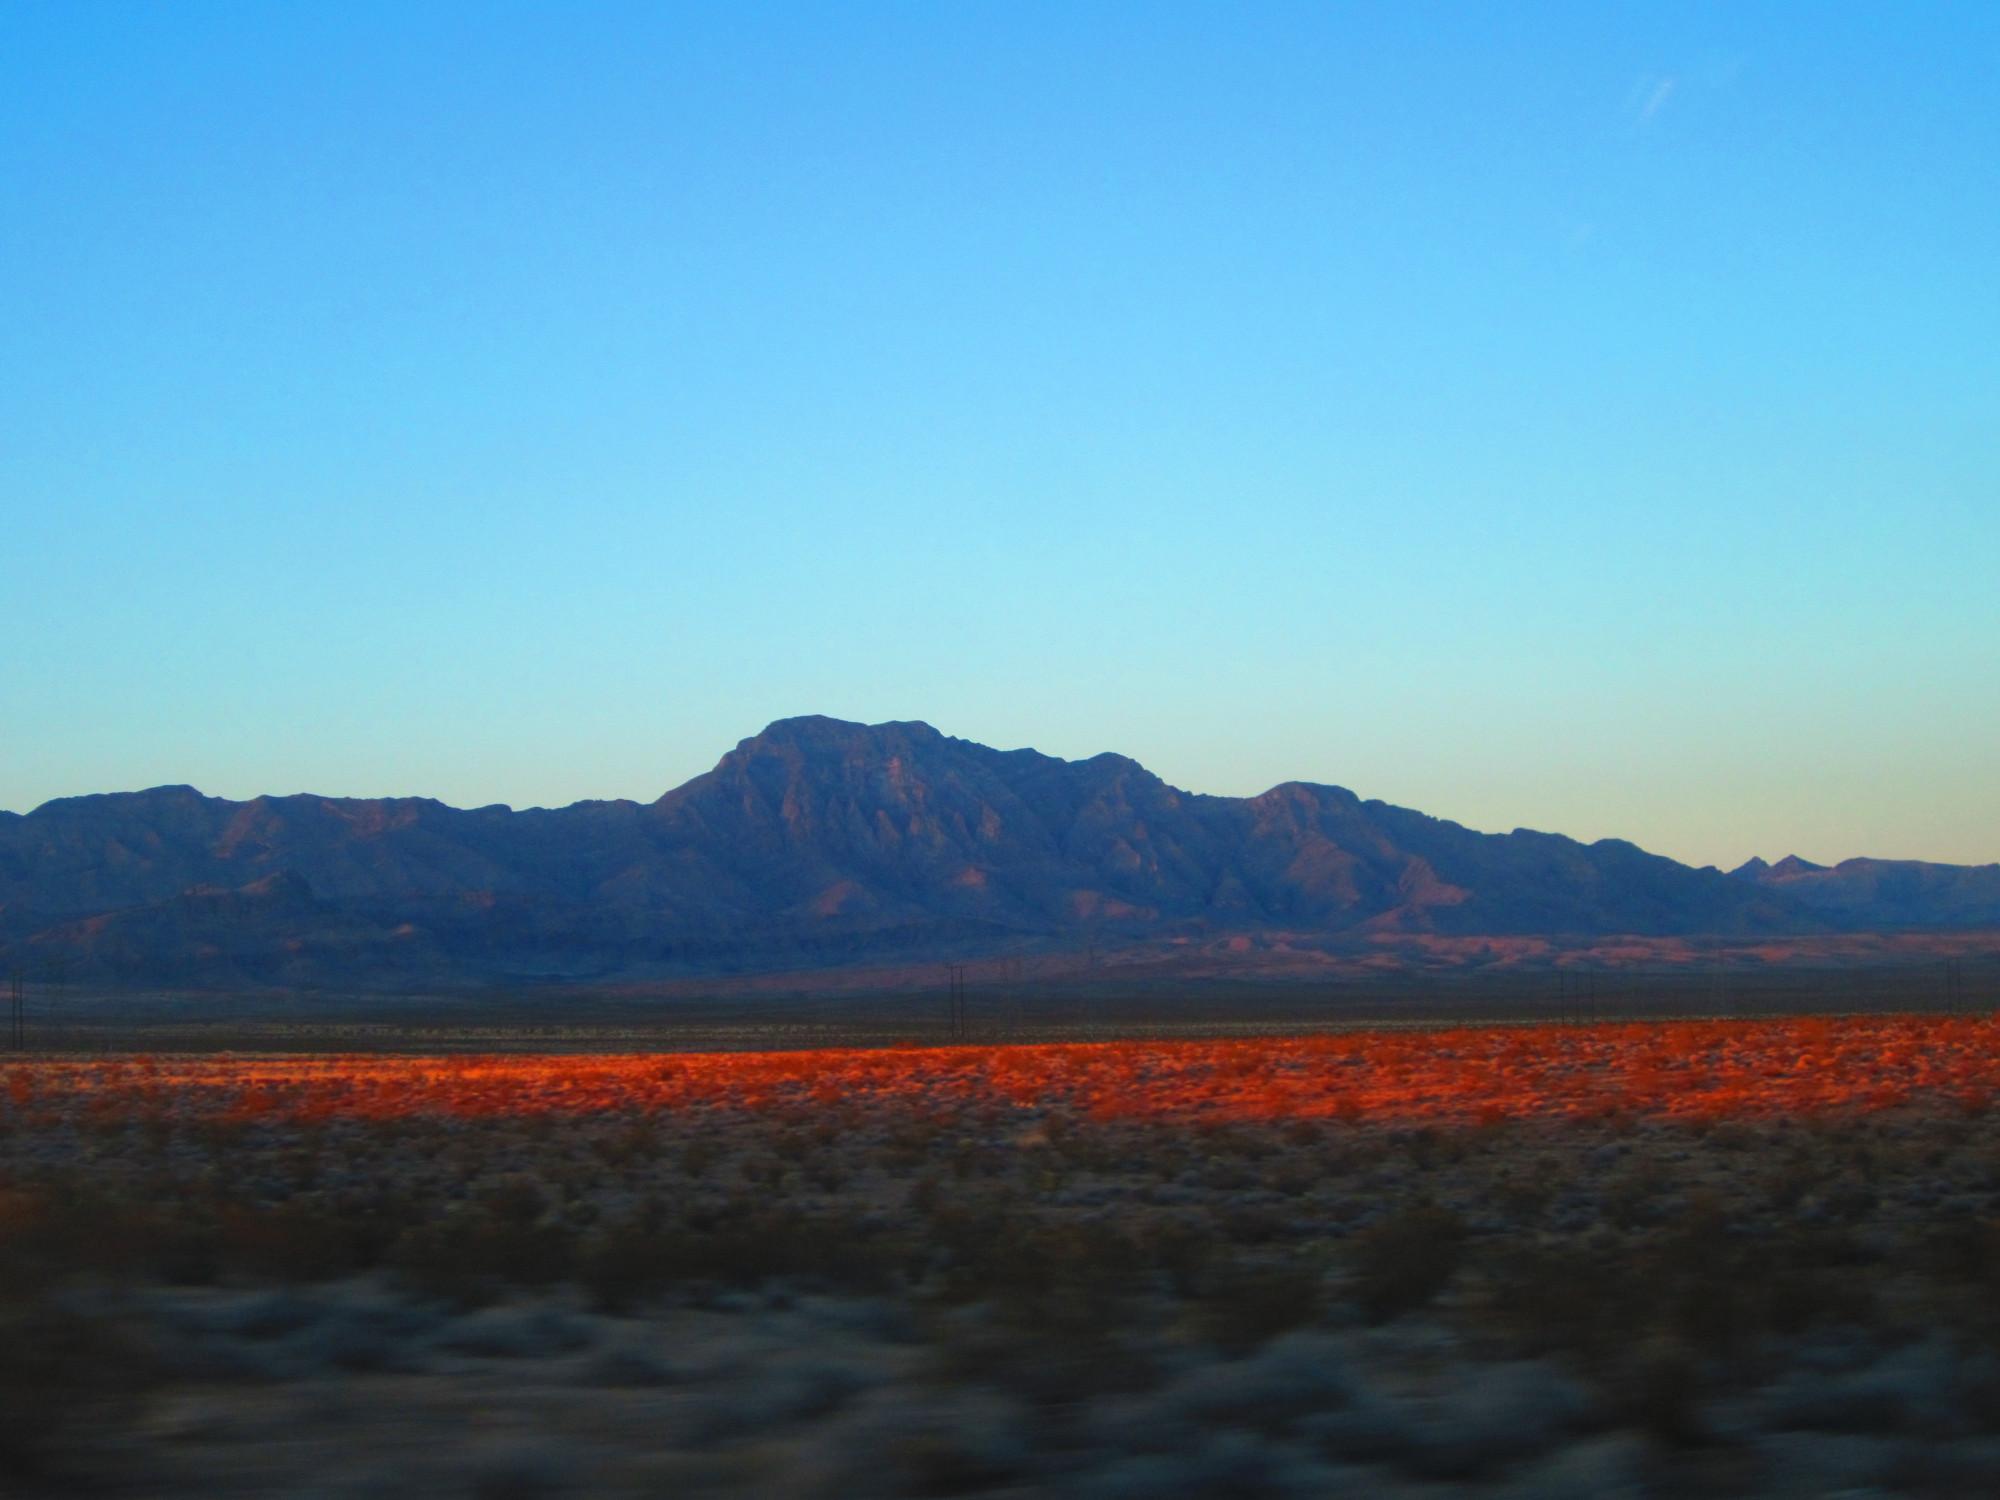 Sunset in the desert, mountain ranges in the background with a vast desert in the front with a strip of red in the middle, presumably the sunset coming through mountains unseen on the right. 